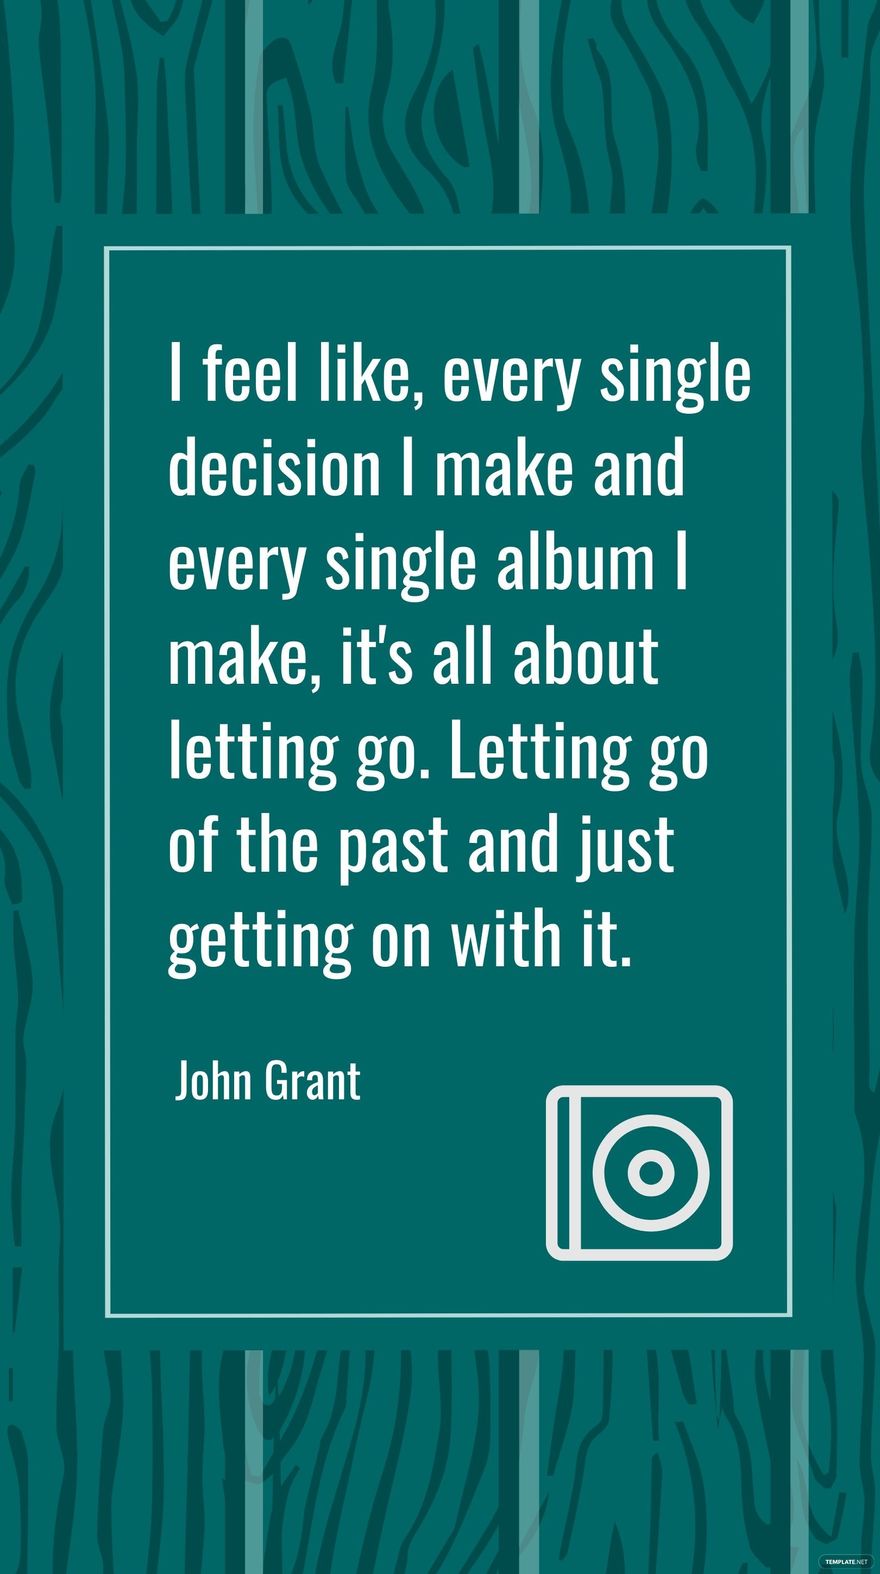 John Grant - I feel like, every single decision I make and every single album I make, it's all about letting go. Letting go of the past and just getting on with it.